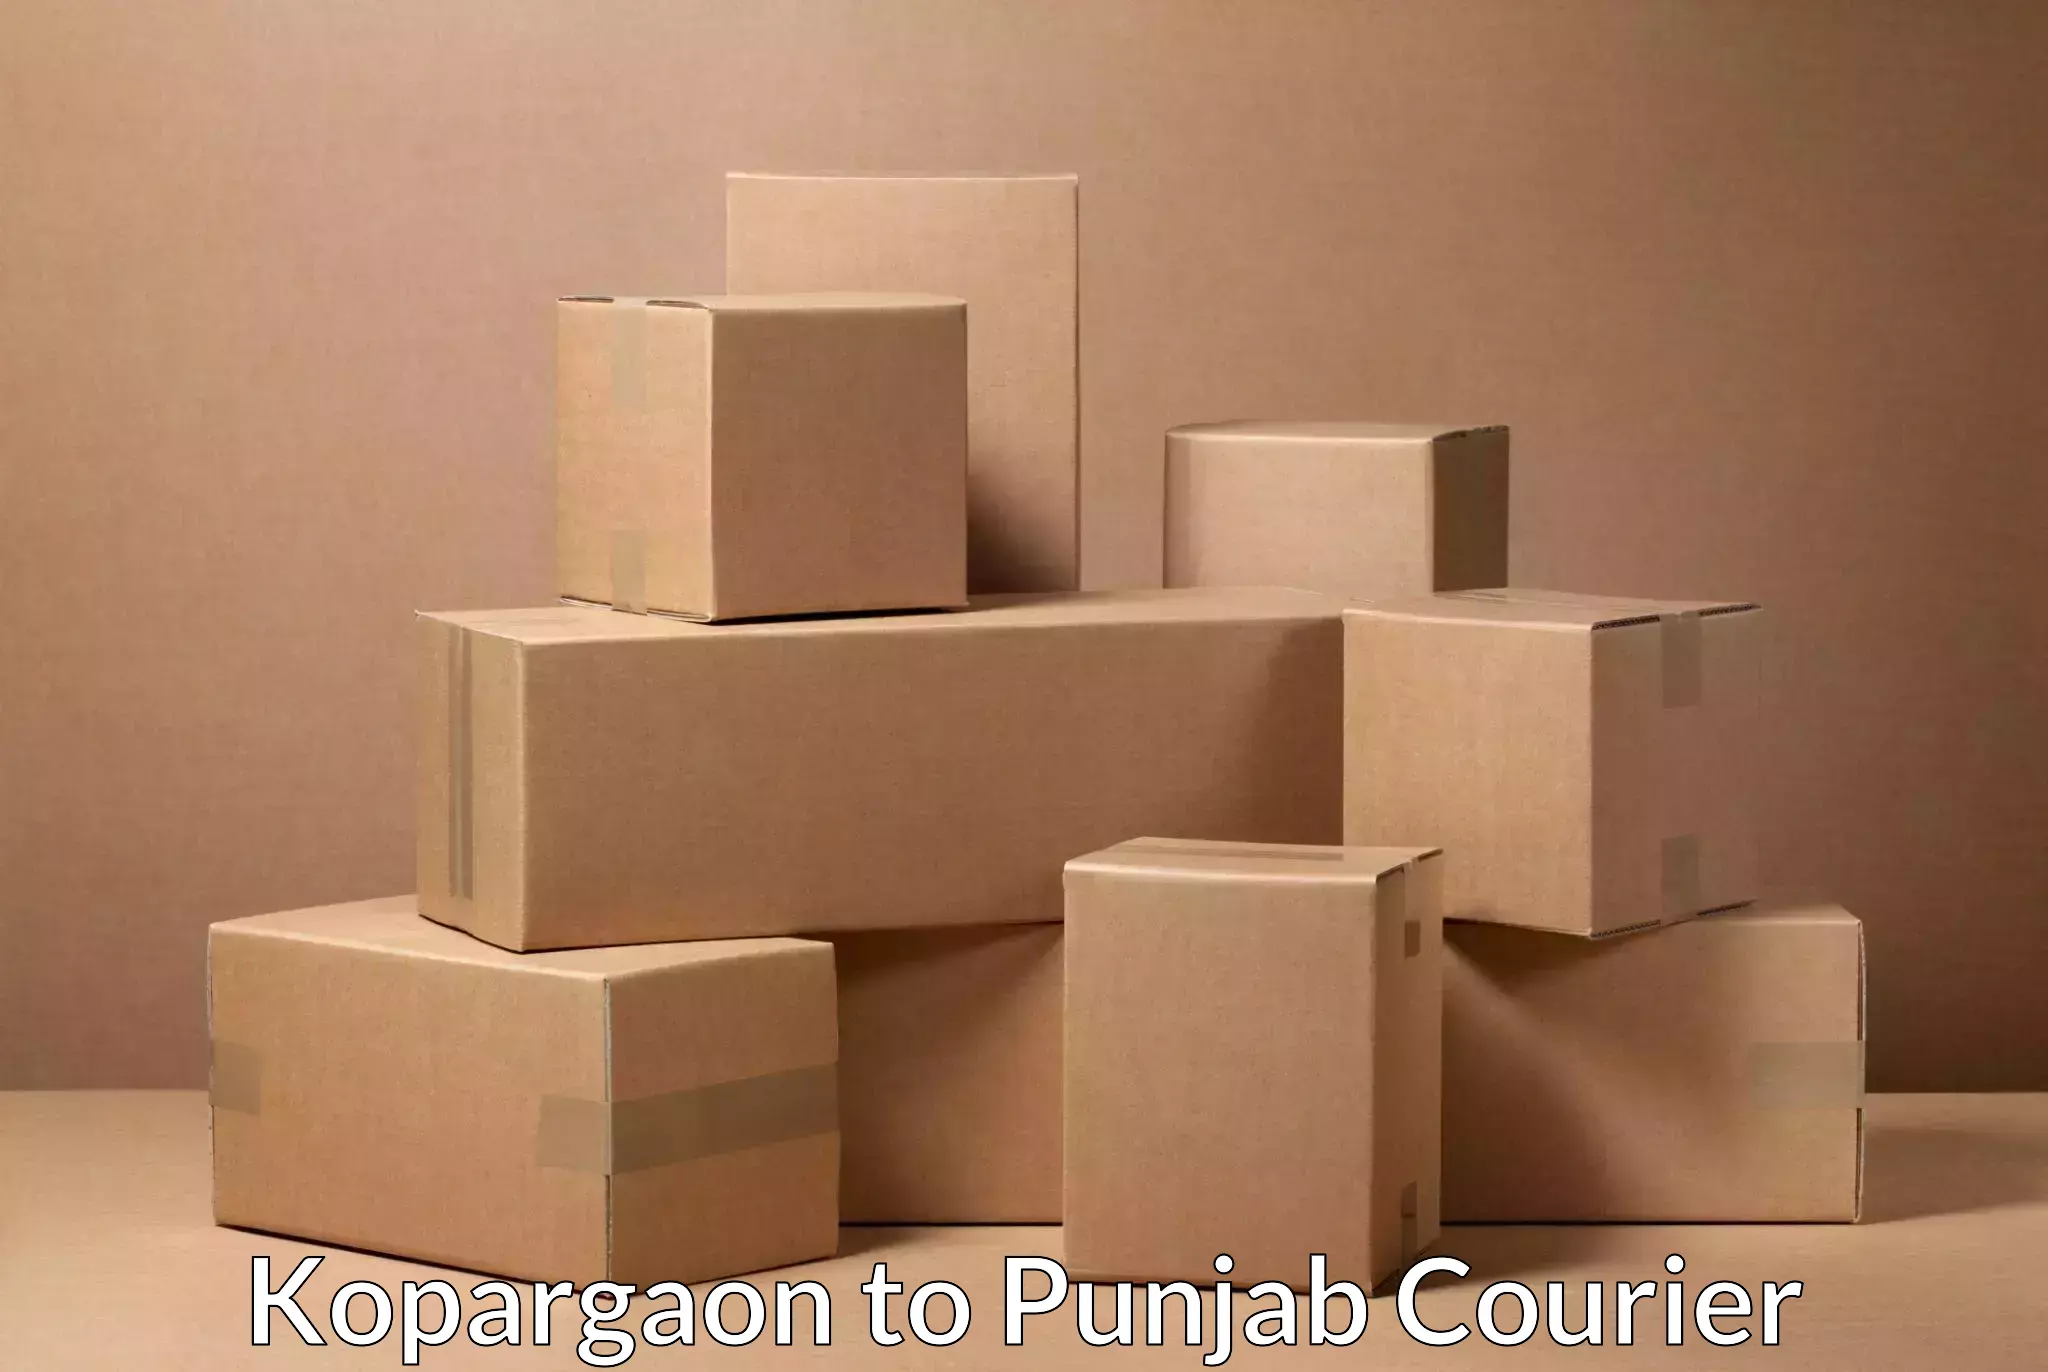 Large-scale shipping solutions Kopargaon to Nakodar